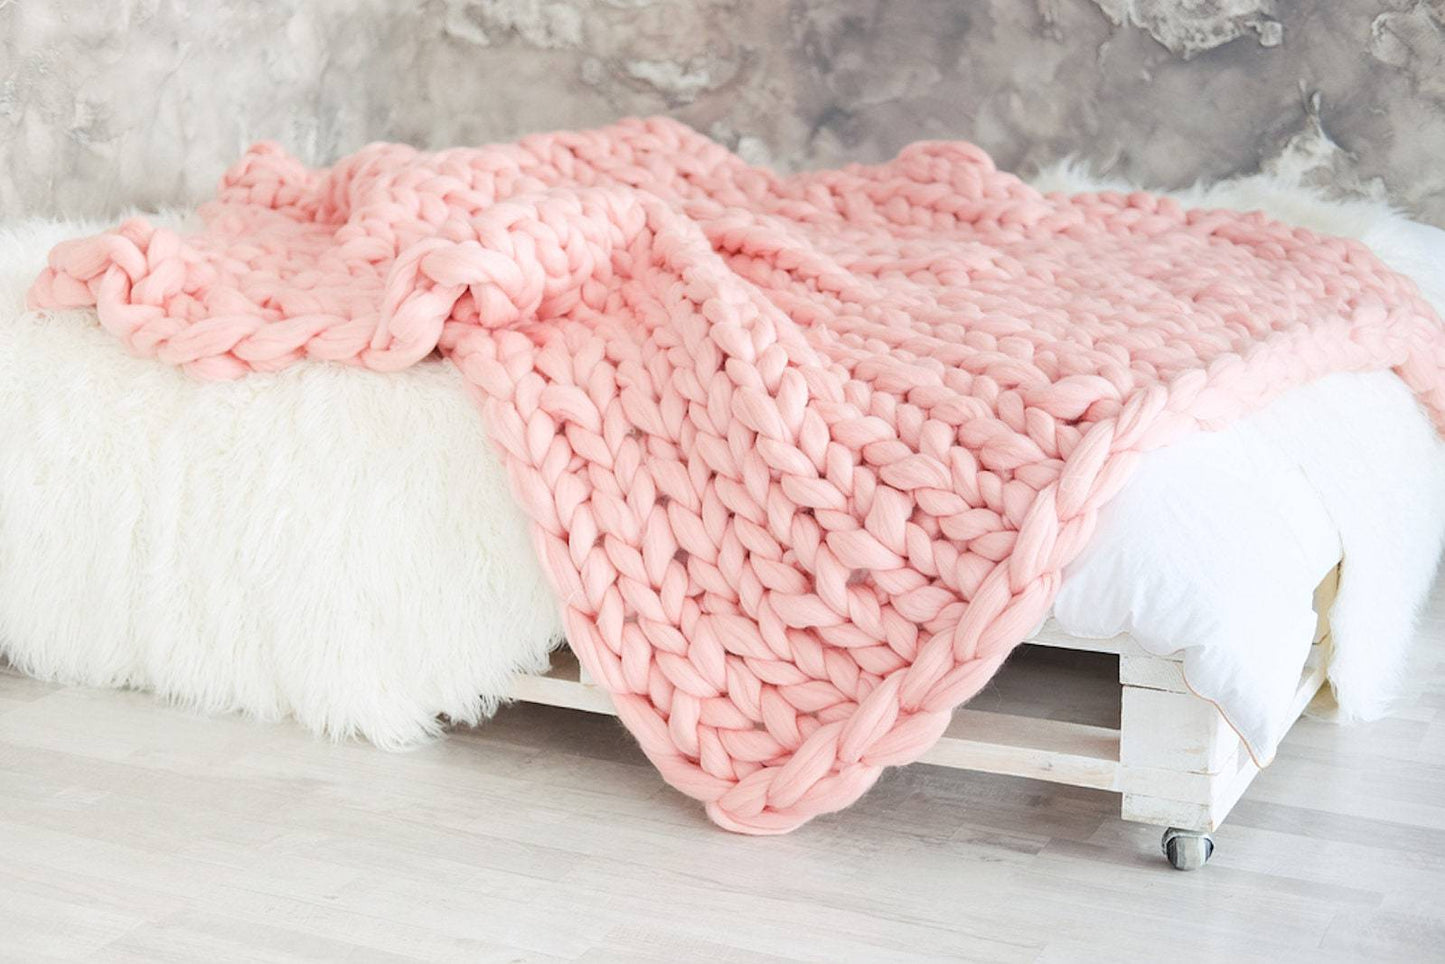 Chunky Knit Blanket Blushing Bride Pink -Super Chunky Knit Merino Wool 40" x 63" Throw Blanket Giant Knit, Bulky, gift for her, wedding gift